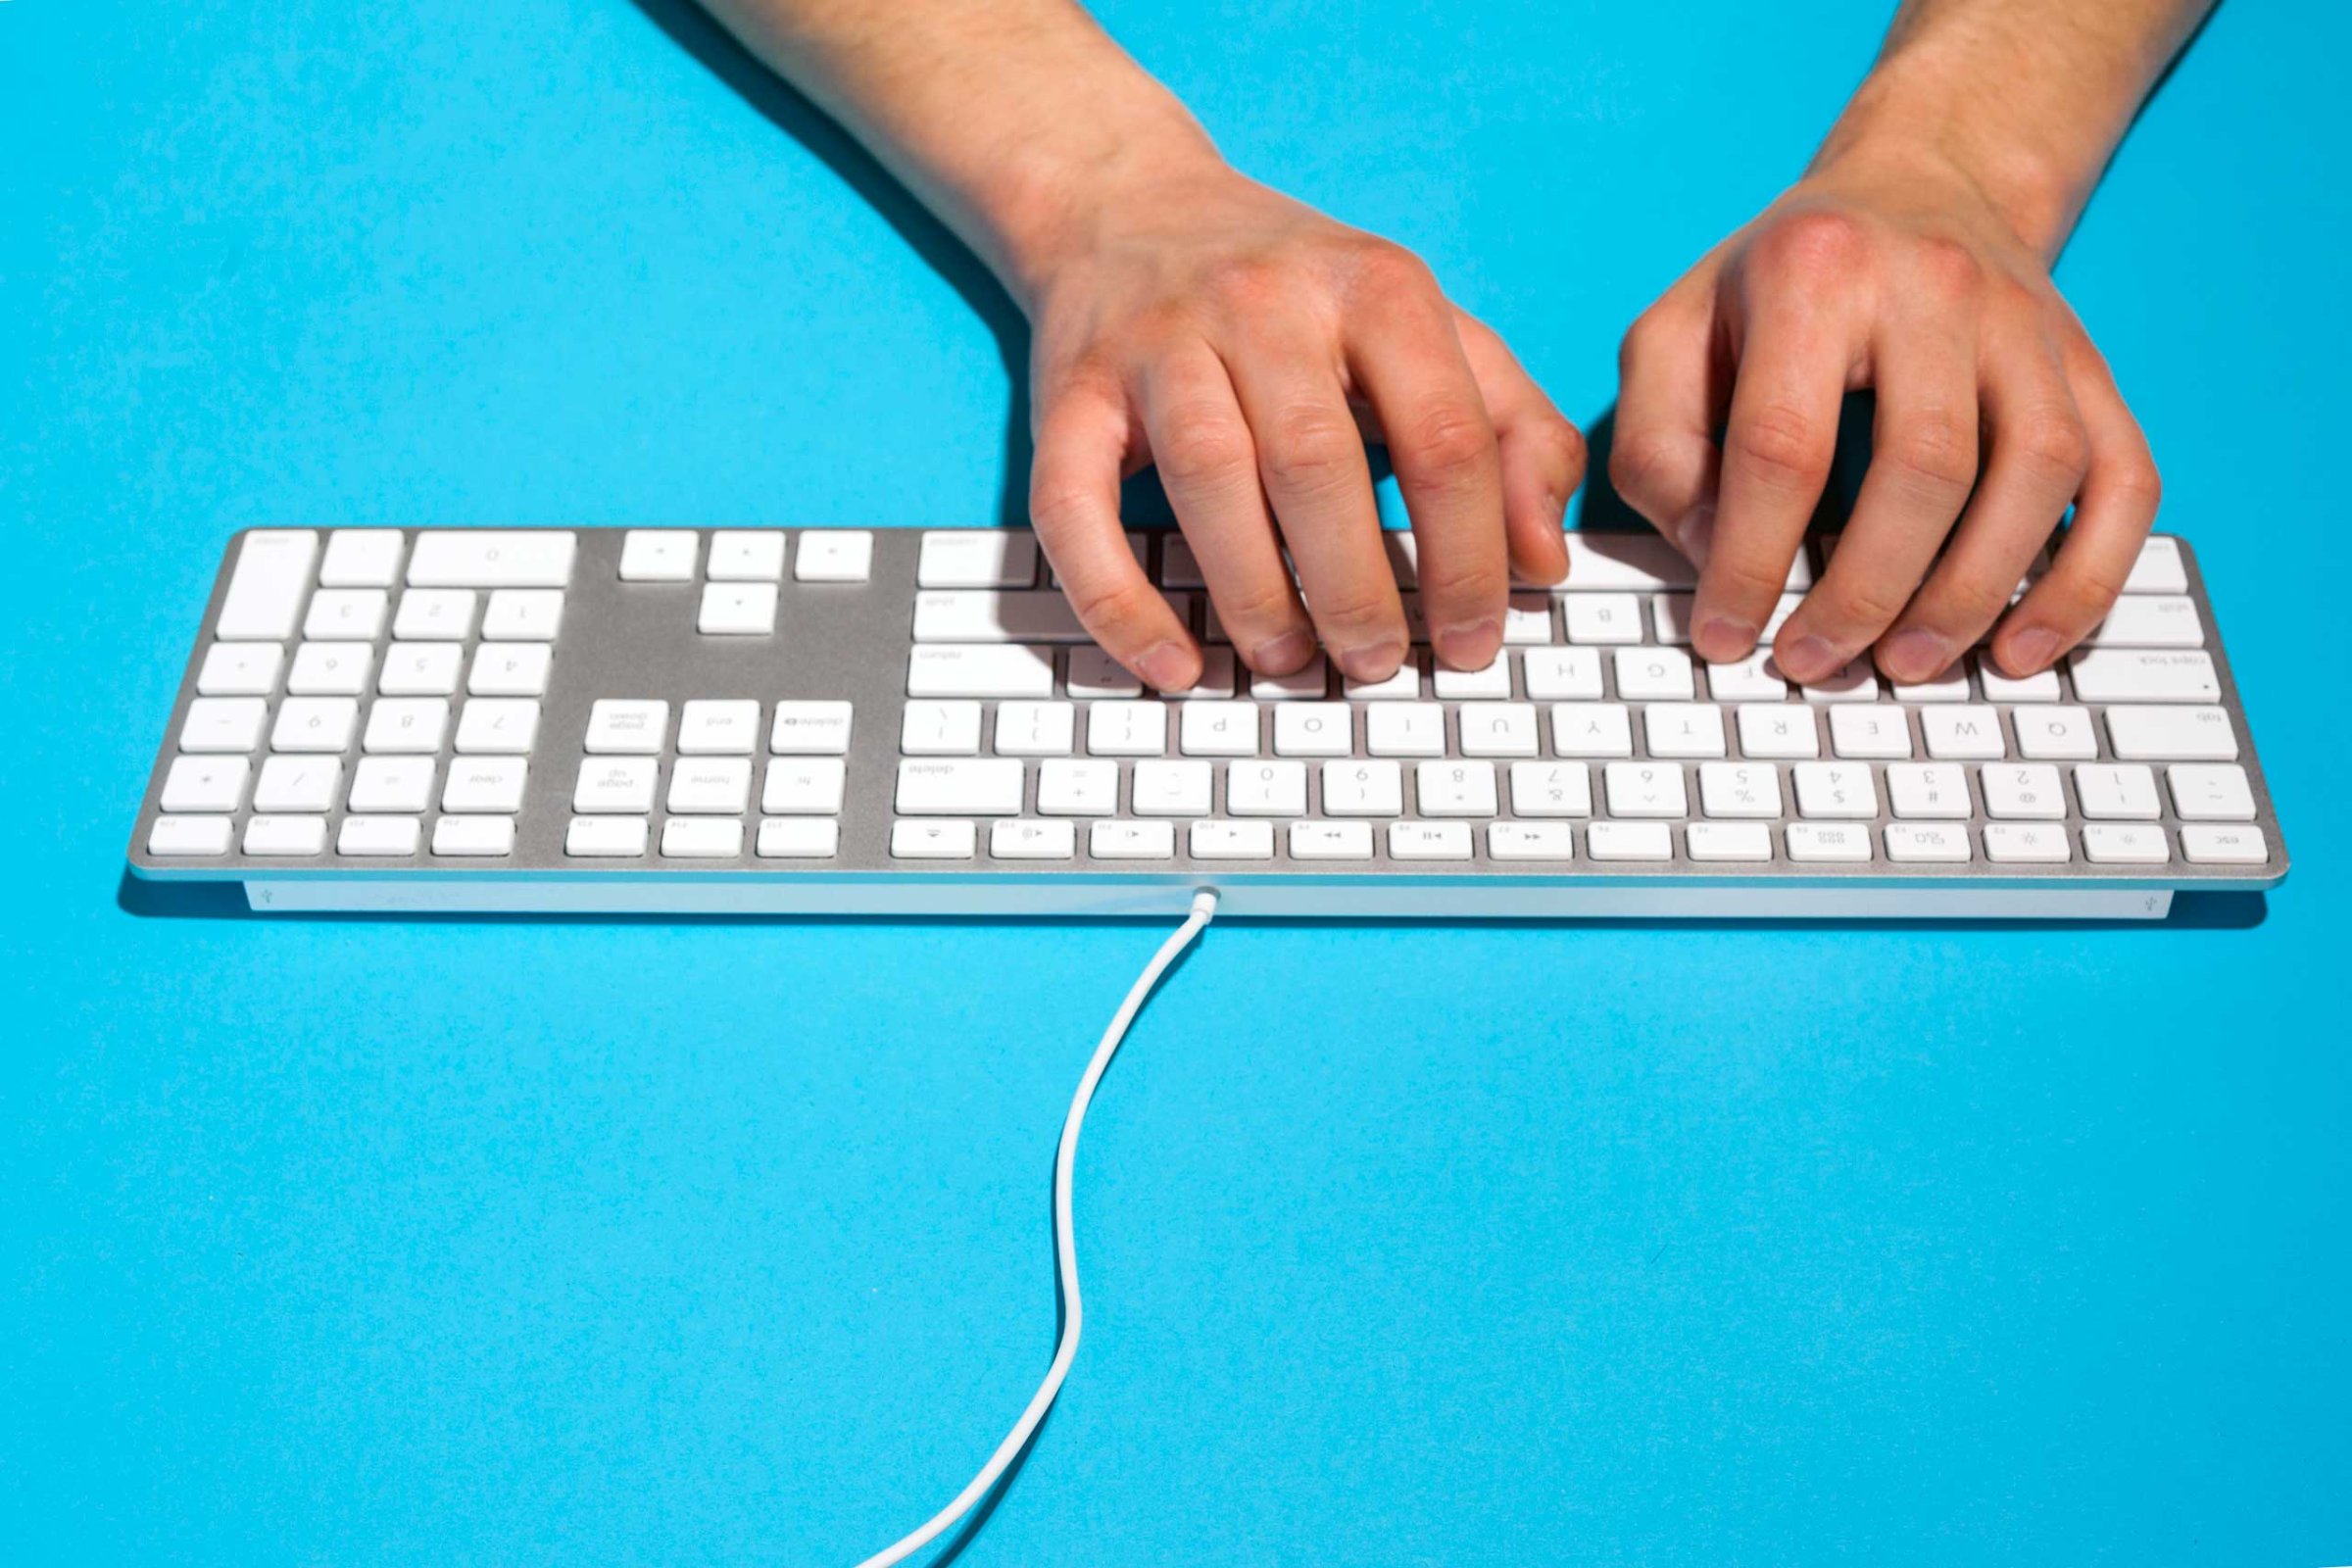 TIME.com stock photos Computer Keyboard Typing